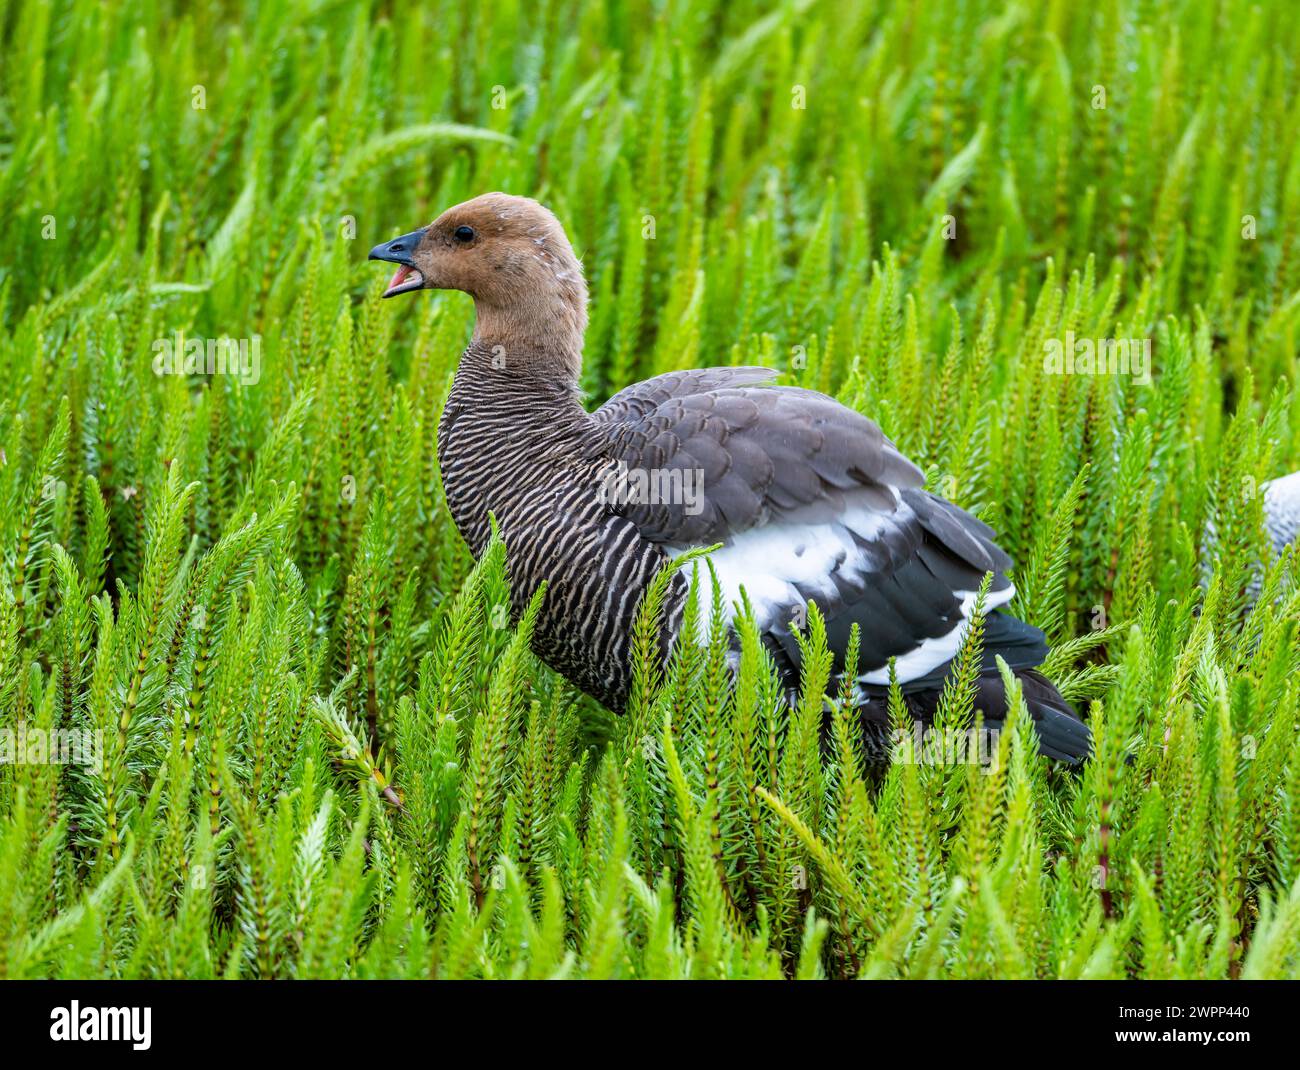 A female Upland Goose (Chloephaga picta) standing in green ferns. Ushuaia, Tierra del Fuego National Park, Argentina. Stock Photo